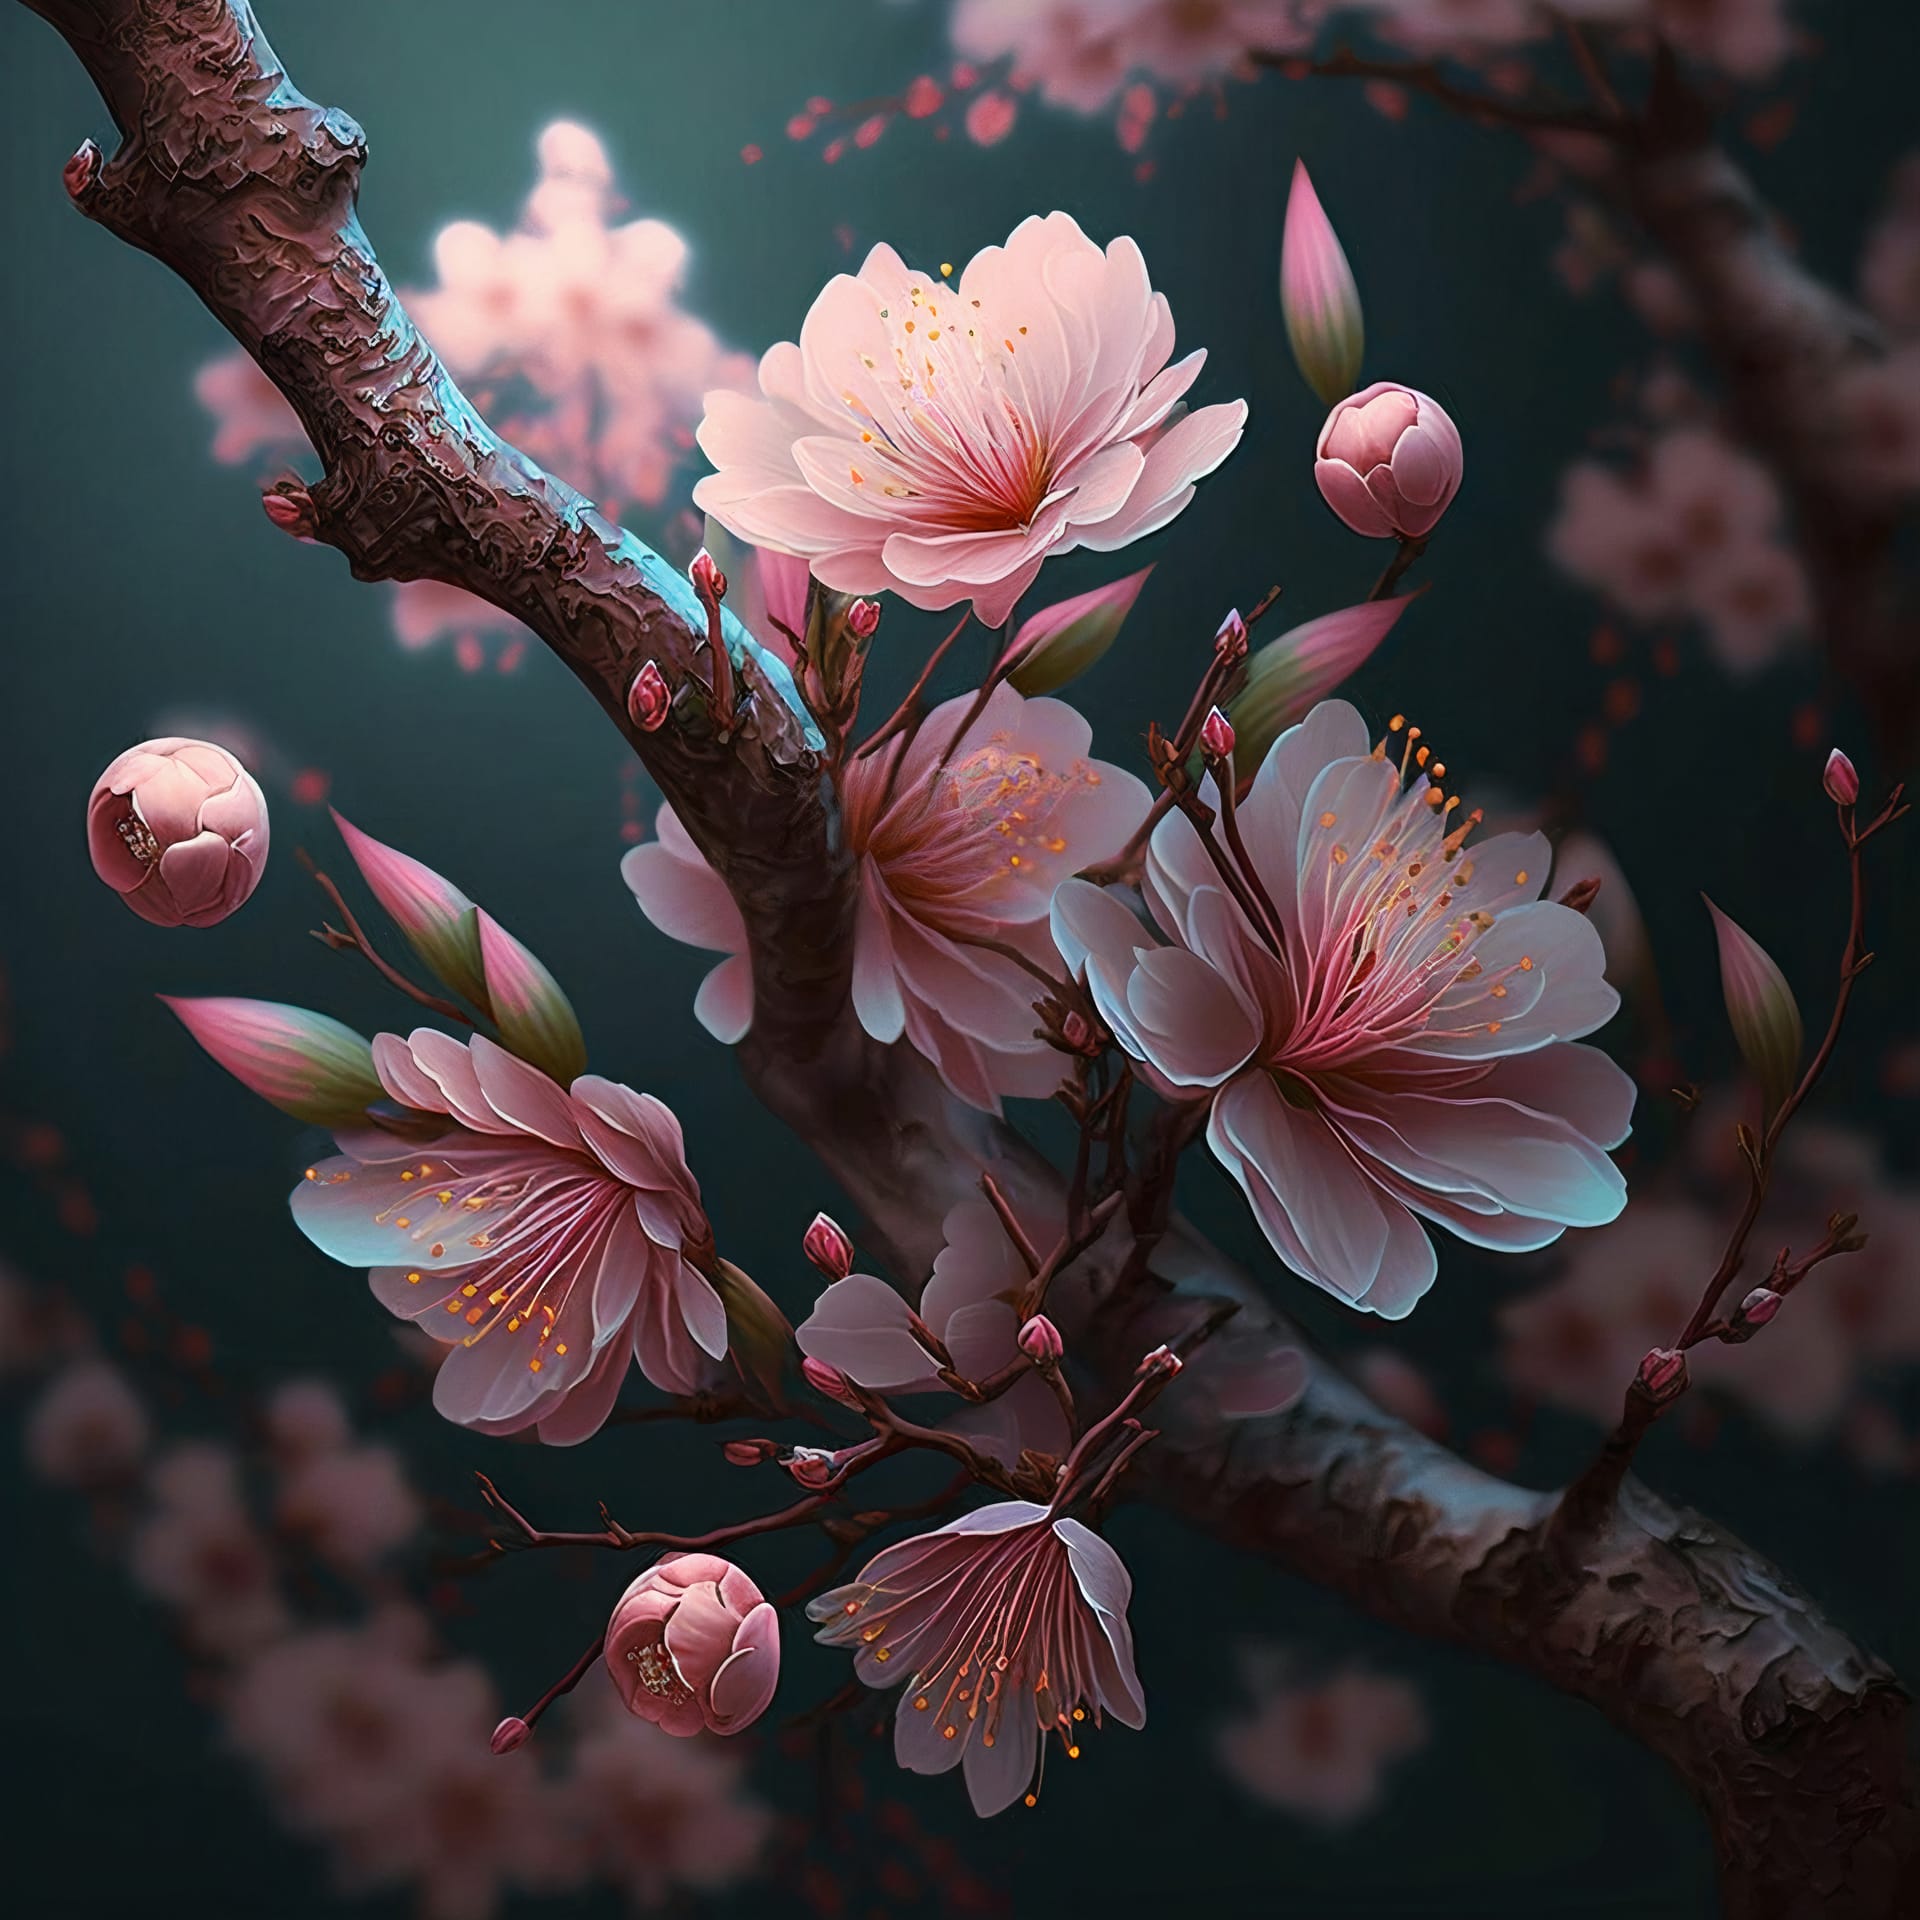 Cherry blossom beautiful sakura flowers pink cherry flowers excellent picture